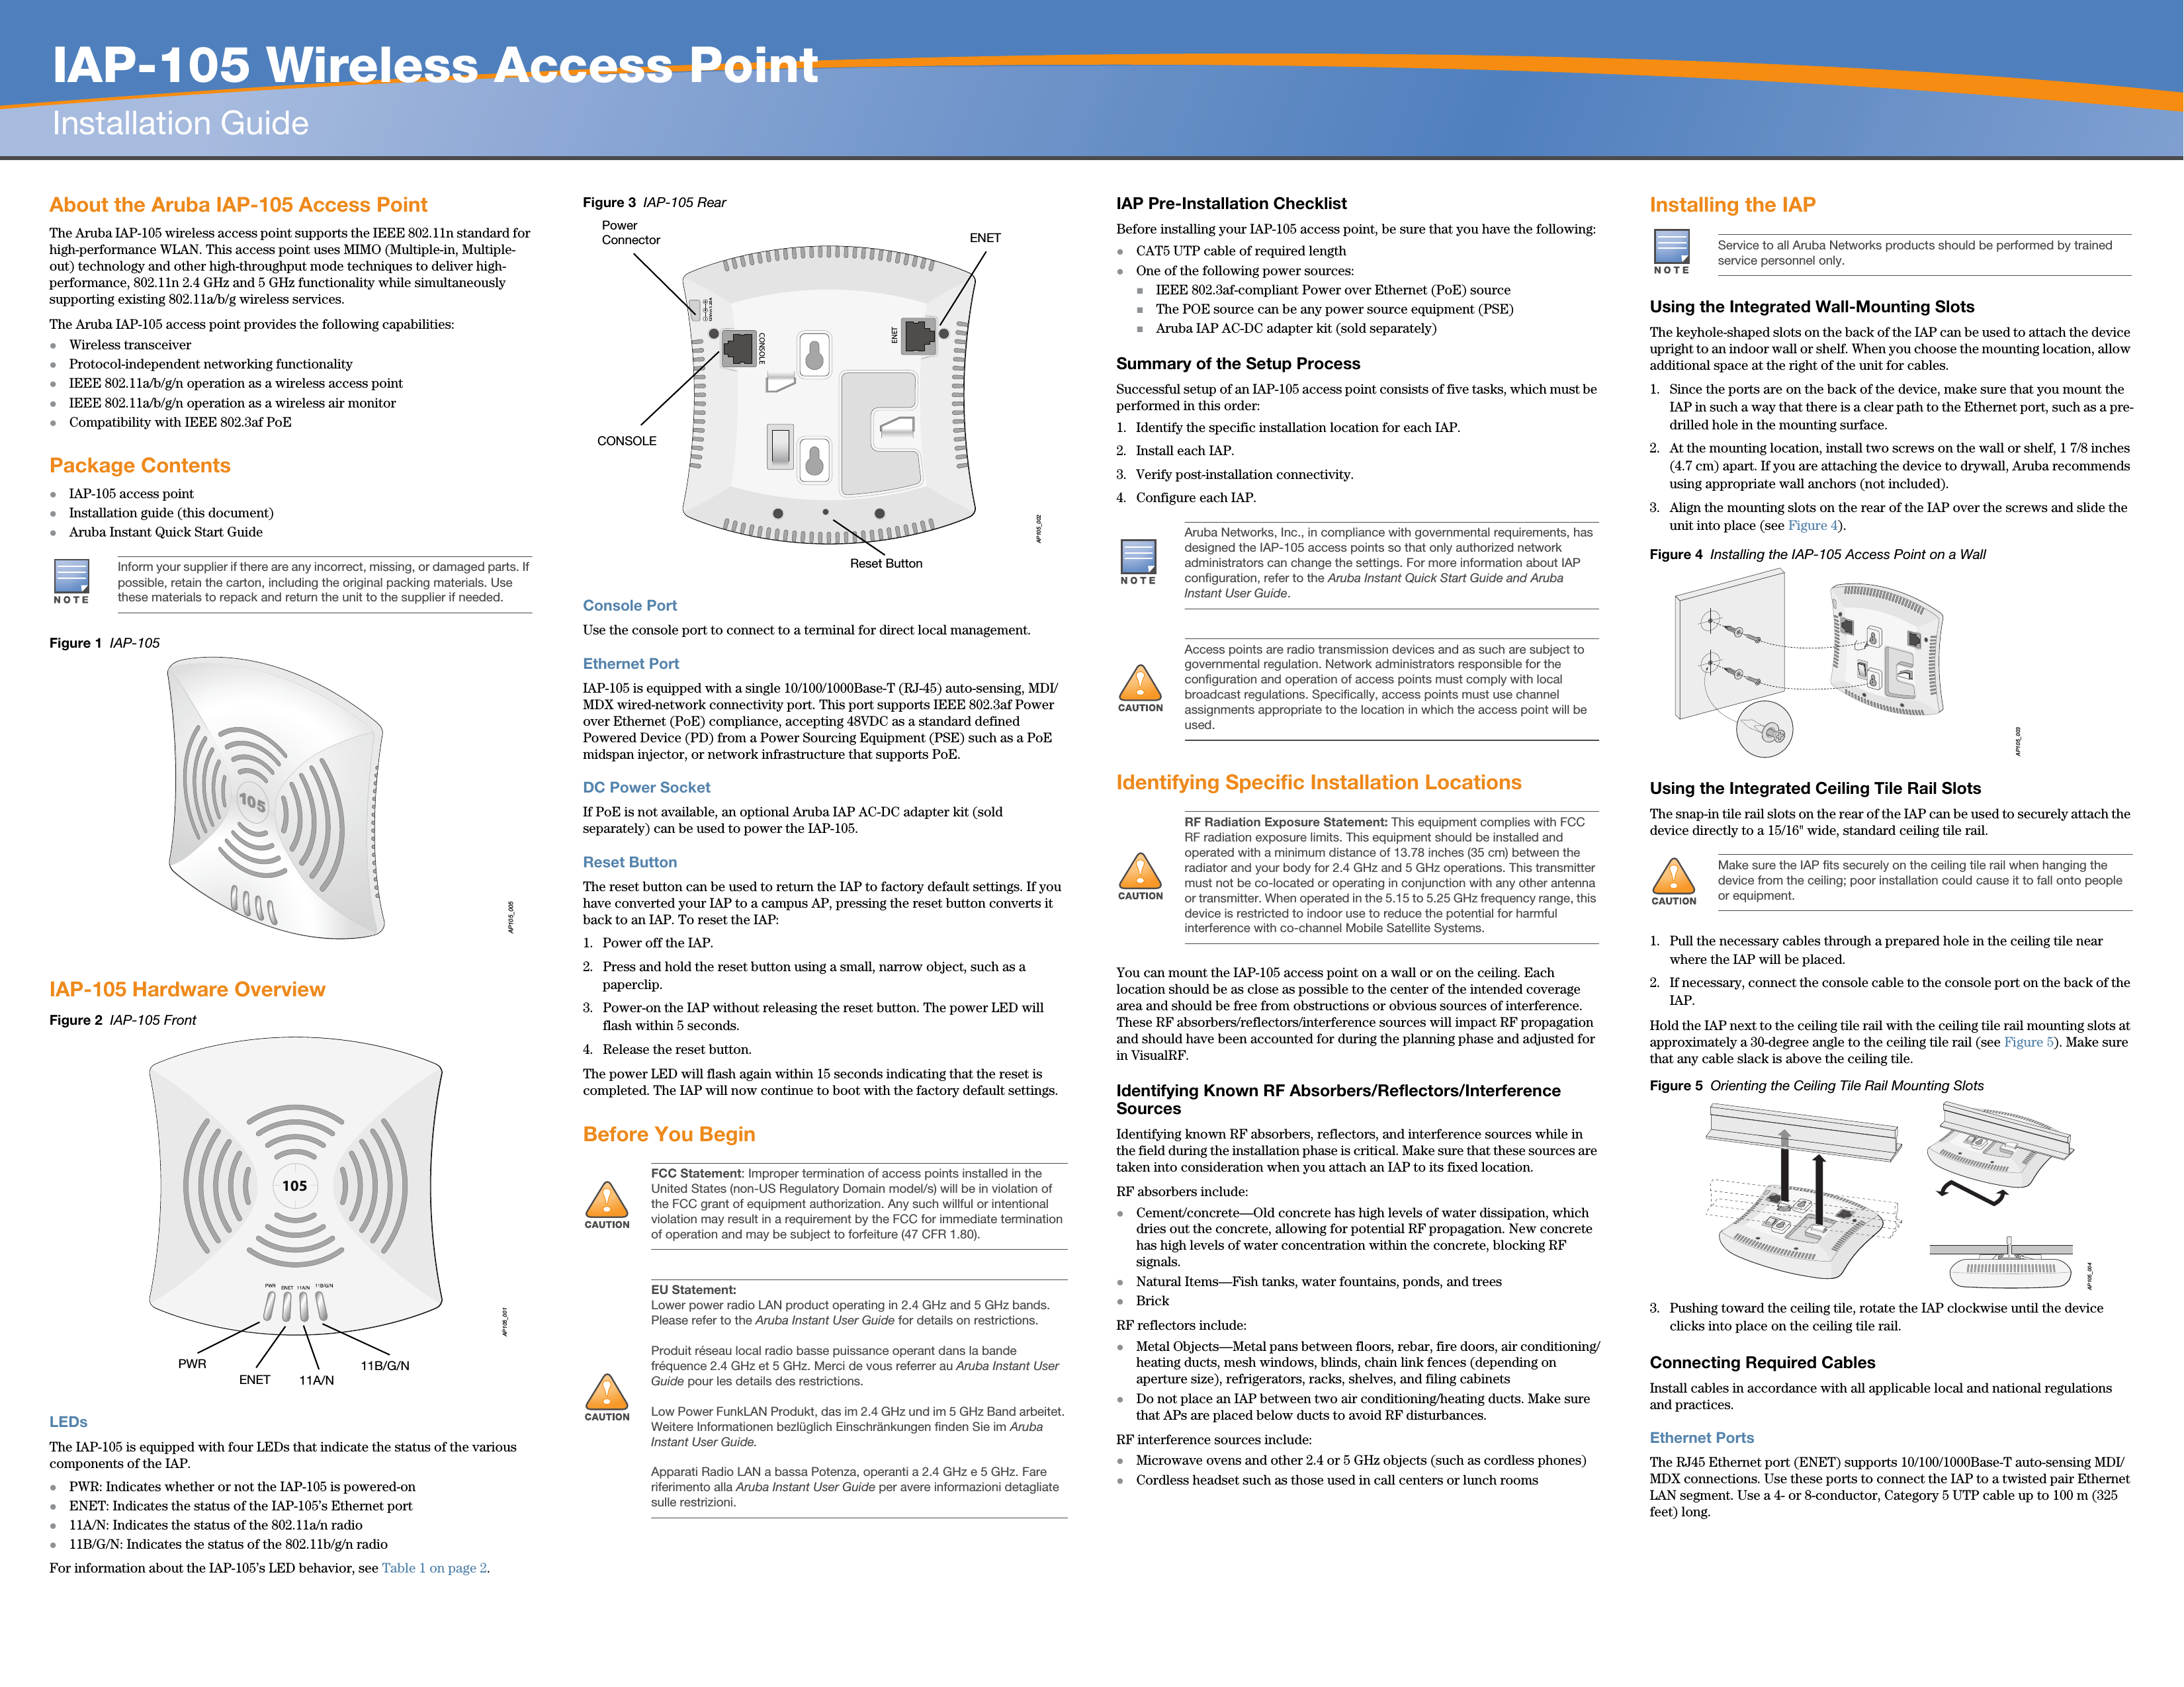   IAP-105 Wireless Access PointInstallation GuideAbout the Aruba IAP-105 Access PointThe Aruba IAP-105 wireless access point supports the IEEE 802.11n standard for high-performance WLAN. This access point uses MIMO (Multiple-in, Multiple-out) technology and other high-throughput mode techniques to deliver high-performance, 802.11n 2.4 GHz and 5 GHz functionality while simultaneously supporting existing 802.11a/b/g wireless services.The Aruba IAP-105 access point provides the following capabilities:Wireless transceiverProtocol-independent networking functionalityIEEE 802.11a/b/g/n operation as a wireless access pointIEEE 802.11a/b/g/n operation as a wireless air monitorCompatibility with IEEE 802.3af PoEPackage ContentsIAP-105 access pointInstallation guide (this document)Aruba Instant Quick Start GuideFigure 1  IAP-105IAP-105 Hardware OverviewFigure 2  IAP-105 FrontLEDsThe IAP-105 is equipped with four LEDs that indicate the status of the various components of the IAP.PWR: Indicates whether or not the IAP-105 is powered-onENET: Indicates the status of the IAP-105’s Ethernet port11A/N: Indicates the status of the 802.11a/n radio11B/G/N: Indicates the status of the 802.11b/g/n radioFor information about the IAP-105’s LED behavior, see Table 1 on page 2.Figure 3  IAP-105 RearConsole PortUse the console port to connect to a terminal for direct local management.Ethernet PortIAP-105 is equipped with a single 10/100/1000Base-T (RJ-45) auto-sensing, MDI/MDX wired-network connectivity port. This port supports IEEE 802.3af Power over Ethernet (PoE) compliance, accepting 48VDC as a standard defined Powered Device (PD) from a Power Sourcing Equipment (PSE) such as a PoE midspan injector, or network infrastructure that supports PoE.DC Power SocketIf PoE is not available, an optional Aruba IAP AC-DC adapter kit (sold separately) can be used to power the IAP-105. Reset ButtonThe reset button can be used to return the IAP to factory default settings. If you have converted your IAP to a campus AP, pressing the reset button converts it back to an IAP. To reset the IAP:1. Power off the IAP.2. Press and hold the reset button using a small, narrow object, such as a paperclip.3. Power-on the IAP without releasing the reset button. The power LED will flash within 5 seconds.4. Release the reset button.The power LED will flash again within 15 seconds indicating that the reset is completed. The IAP will now continue to boot with the factory default settings.Before You BeginIAP Pre-Installation ChecklistBefore installing your IAP-105 access point, be sure that you have the following:CAT5 UTP cable of required lengthOne of the following power sources:IEEE 802.3af-compliant Power over Ethernet (PoE) sourceThe POE source can be any power source equipment (PSE) Aruba IAP AC-DC adapter kit (sold separately)Summary of the Setup ProcessSuccessful setup of an IAP-105 access point consists of five tasks, which must be performed in this order:1. Identify the specific installation location for each IAP.2. Install each IAP.3. Verify post-installation connectivity.4. Configure each IAP.Identifying Specific Installation LocationsYou can mount the IAP-105 access point on a wall or on the ceiling. Each location should be as close as possible to the center of the intended coverage area and should be free from obstructions or obvious sources of interference. These RF absorbers/reflectors/interference sources will impact RF propagation and should have been accounted for during the planning phase and adjusted for in VisualRF.Identifying Known RF Absorbers/Reflectors/Interference SourcesIdentifying known RF absorbers, reflectors, and interference sources while in the field during the installation phase is critical. Make sure that these sources are taken into consideration when you attach an IAP to its fixed location.RF absorbers include:Cement/concrete—Old concrete has high levels of water dissipation, which dries out the concrete, allowing for potential RF propagation. New concrete has high levels of water concentration within the concrete, blocking RF signals.Natural Items—Fish tanks, water fountains, ponds, and treesBrickRF reflectors include:Metal Objects—Metal pans between floors, rebar, fire doors, air conditioning/heating ducts, mesh windows, blinds, chain link fences (depending on aperture size), refrigerators, racks, shelves, and filing cabinetsDo not place an IAP between two air conditioning/heating ducts. Make sure that APs are placed below ducts to avoid RF disturbances.RF interference sources include:Microwave ovens and other 2.4 or 5 GHz objects (such as cordless phones)Cordless headset such as those used in call centers or lunch roomsInstalling the IAPUsing the Integrated Wall-Mounting SlotsThe keyhole-shaped slots on the back of the IAP can be used to attach the device upright to an indoor wall or shelf. When you choose the mounting location, allow additional space at the right of the unit for cables.1. Since the ports are on the back of the device, make sure that you mount the IAP in such a way that there is a clear path to the Ethernet port, such as a pre-drilled hole in the mounting surface.2. At the mounting location, install two screws on the wall or shelf, 1 7/8 inches (4.7 cm) apart. If you are attaching the device to drywall, Aruba recommends using appropriate wall anchors (not included).3. Align the mounting slots on the rear of the IAP over the screws and slide the unit into place (see Figure 4).Figure 4  Installing the IAP-105 Access Point on a WallUsing the Integrated Ceiling Tile Rail SlotsThe snap-in tile rail slots on the rear of the IAP can be used to securely attach the device directly to a 15/16&quot; wide, standard ceiling tile rail.1. Pull the necessary cables through a prepared hole in the ceiling tile near where the IAP will be placed.2. If necessary, connect the console cable to the console port on the back of the IAP.Hold the IAP next to the ceiling tile rail with the ceiling tile rail mounting slots at approximately a 30-degree angle to the ceiling tile rail (see Figure 5). Make sure that any cable slack is above the ceiling tile.Figure 5  Orienting the Ceiling Tile Rail Mounting Slots3. Pushing toward the ceiling tile, rotate the IAP clockwise until the device clicks into place on the ceiling tile rail.Connecting Required CablesInstall cables in accordance with all applicable local and national regulations and practices.Ethernet PortsThe RJ45 Ethernet port (ENET) supports 10/100/1000Base-T auto-sensing MDI/MDX connections. Use these ports to connect the IAP to a twisted pair Ethernet LAN segment. Use a 4- or 8-conductor, Category 5 UTP cable up to 100 m (325 feet) long.Inform your supplier if there are any incorrect, missing, or damaged parts. If possible, retain the carton, including the original packing materials. Use these materials to repack and return the unit to the supplier if needed.AP105_005AP105_001105PWRENET 11B/G/N11A/N!FCC Statement: Improper termination of access points installed in the United States (non-US Regulatory Domain model/s) will be in violation of the FCC grant of equipment authorization. Any such willful or intentional violation may result in a requirement by the FCC for immediate termination of operation and may be subject to forfeiture (47 CFR 1.80).!EU Statement: Lower power radio LAN product operating in 2.4 GHz and 5 GHz bands. Please refer to the Aruba Instant User Guide for details on restrictions.Produit réseau local radio basse puissance operant dans la bande fréquence 2.4 GHz et 5 GHz. Merci de vous referrer au Aruba Instant User Guide pour les details des restrictions.Low Power FunkLAN Produkt, das im 2.4 GHz und im 5 GHz Band arbeitet. Weitere Informationen bezlüglich Einschränkungen finden Sie im Aruba Instant User Guide.Apparati Radio LAN a bassa Potenza, operanti a 2.4 GHz e 5 GHz. Fare riferimento alla Aruba Instant User Guide per avere informazioni detagliate sulle restrizioni.AP105_002CONSOLEENET12V       1.25ACONSOLEENETPower ConnectorReset ButtonAruba Networks, Inc., in compliance with governmental requirements, has designed the IAP-105 access points so that only authorized network administrators can change the settings. For more information about IAP configuration, refer to the Aruba Instant Quick Start Guide and Aruba Instant User Guide.!Access points are radio transmission devices and as such are subject to governmental regulation. Network administrators responsible for the configuration and operation of access points must comply with local broadcast regulations. Specifically, access points must use channel assignments appropriate to the location in which the access point will be used.!RF Radiation Exposure Statement: This equipment complies with FCC RF radiation exposure limits. This equipment should be installed and operated with a minimum distance of 13.78 inches (35 cm) between the radiator and your body for 2.4 GHz and 5 GHz operations. This transmitter must not be co-located or operating in conjunction with any other antenna or transmitter. When operated in the 5.15 to 5.25 GHz frequency range, this device is restricted to indoor use to reduce the potential for harmful interference with co-channel Mobile Satellite Systems.Service to all Aruba Networks products should be performed by trained service personnel only.!Make sure the IAP fits securely on the ceiling tile rail when hanging the device from the ceiling; poor installation could cause it to fall onto people or equipment.AP105_003AP105_004